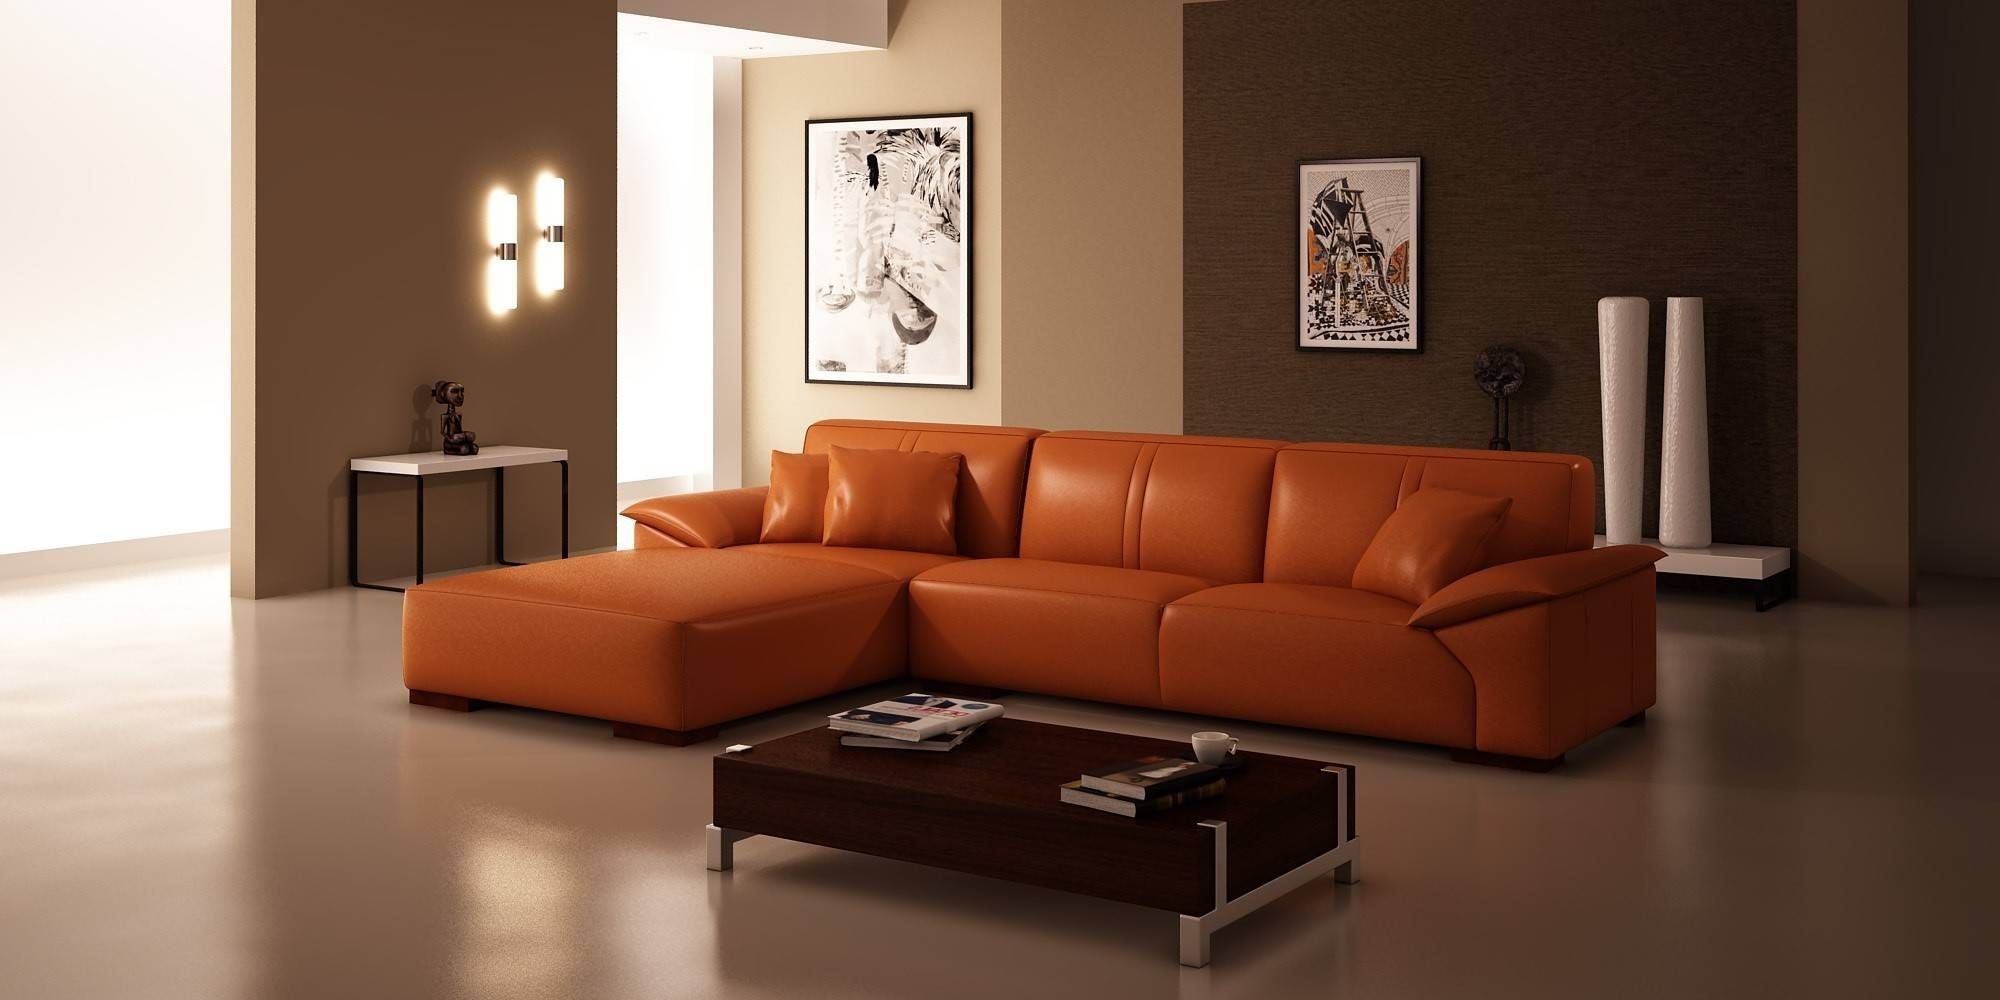 Best 25 Orange Living Rooms Ideas Only On Pinterest Orange Inside Burnt Orange Living Room Sofas (Photo 1 of 15)